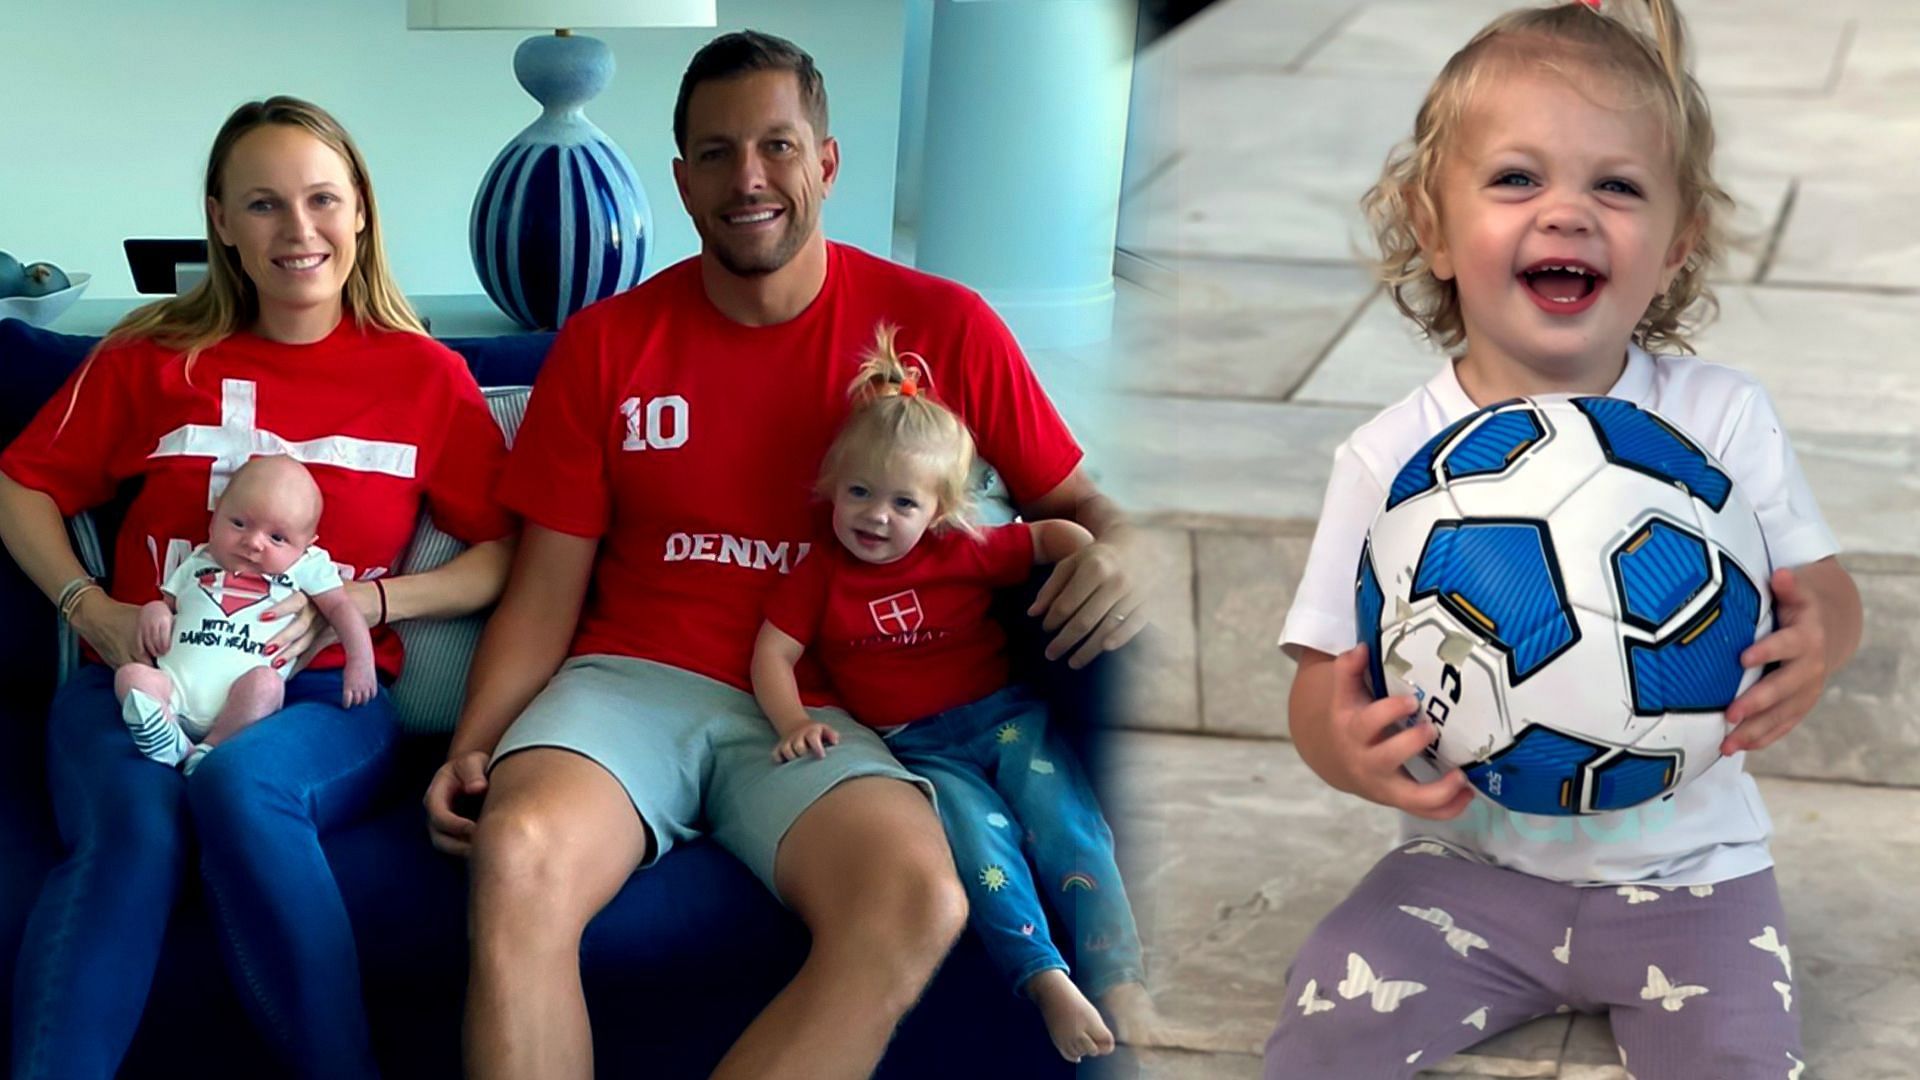 Caroline Wozniacki shares adorable photos of her family watching Denmark play in the FIFA World Cup together